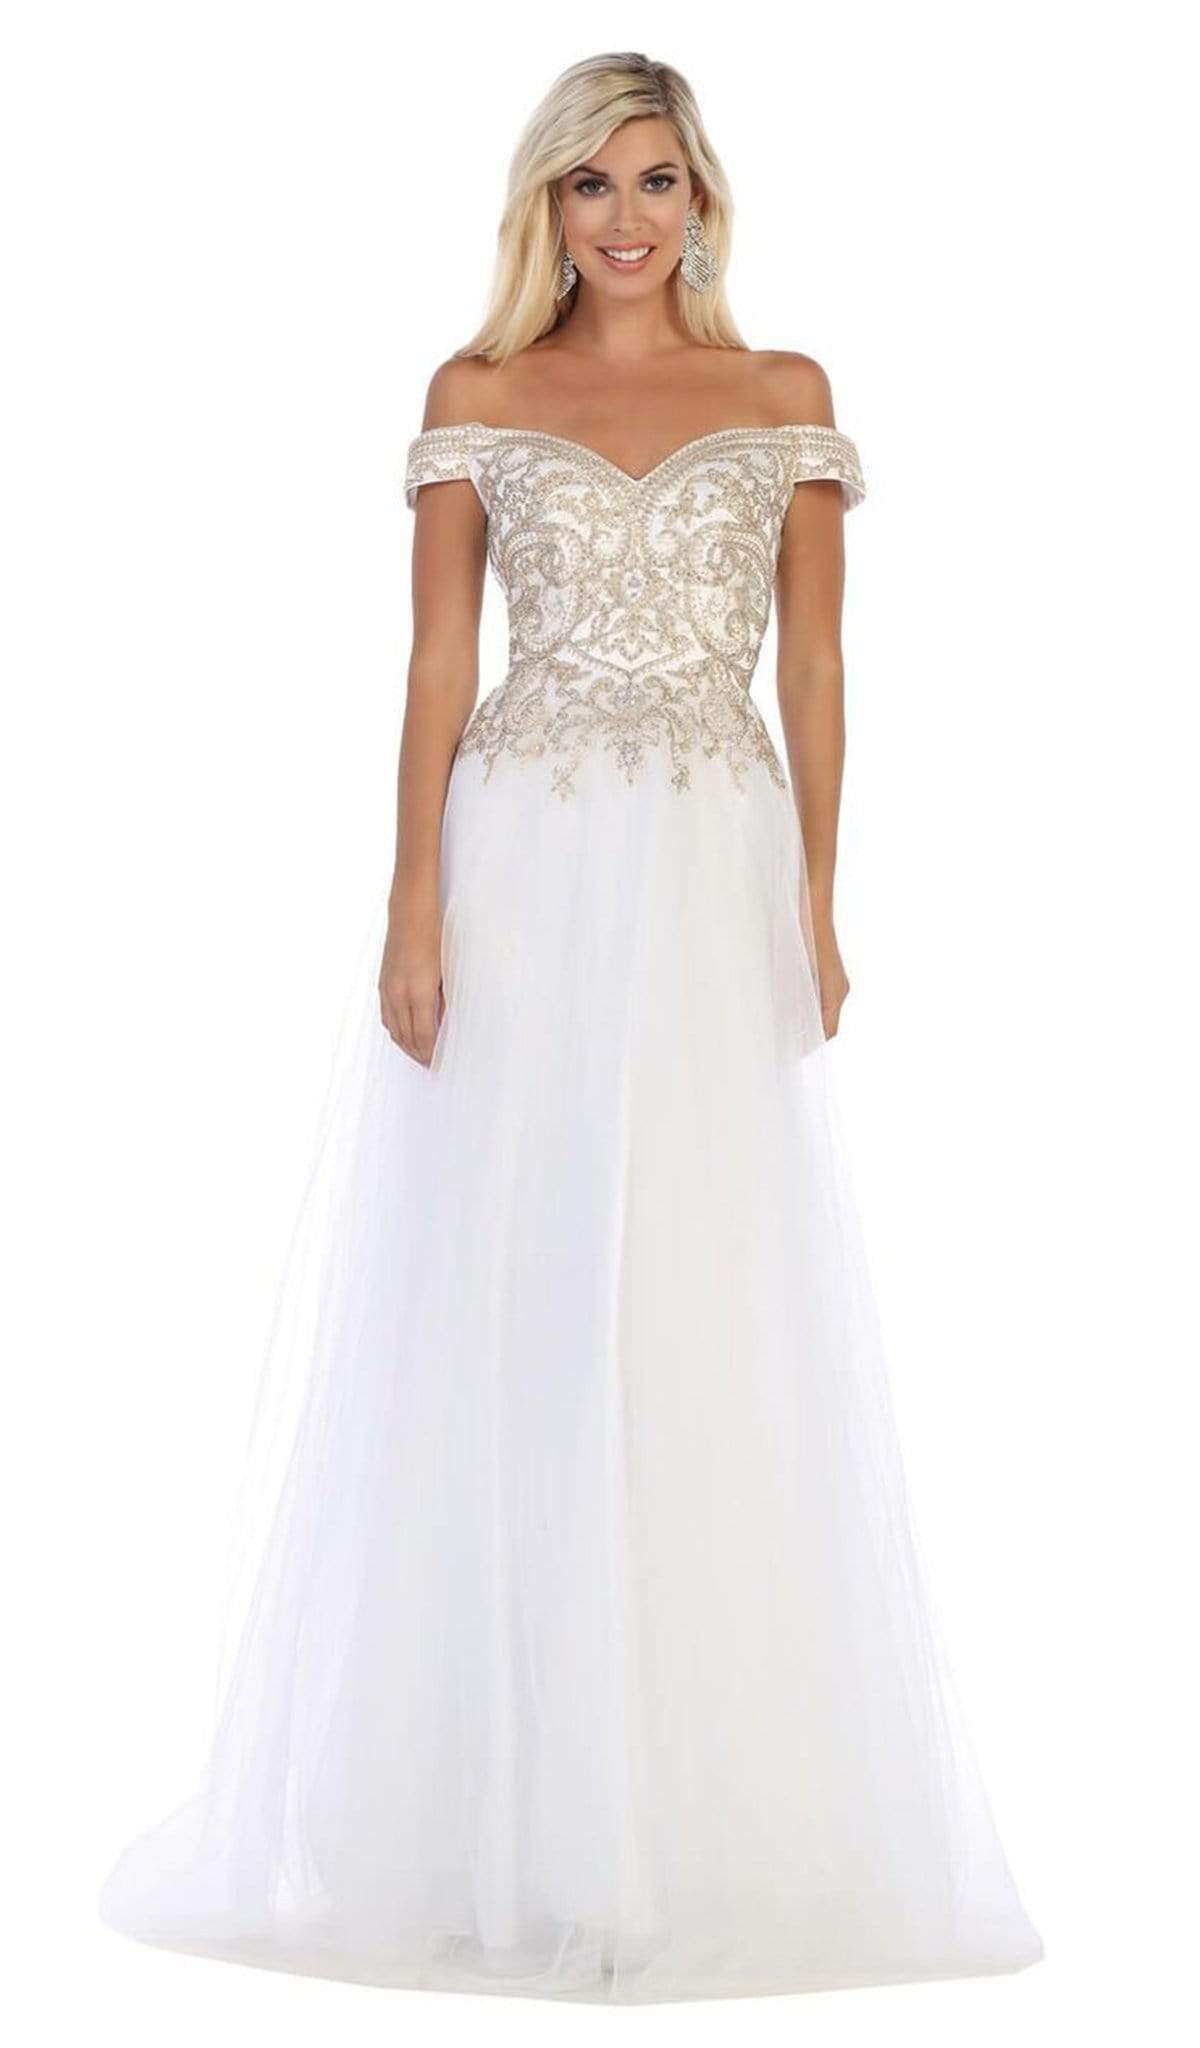 May Queen - MQ1626 Jeweled Applique Bodice Off Shoulder Gown Bridesmaid Dresses 4 / White